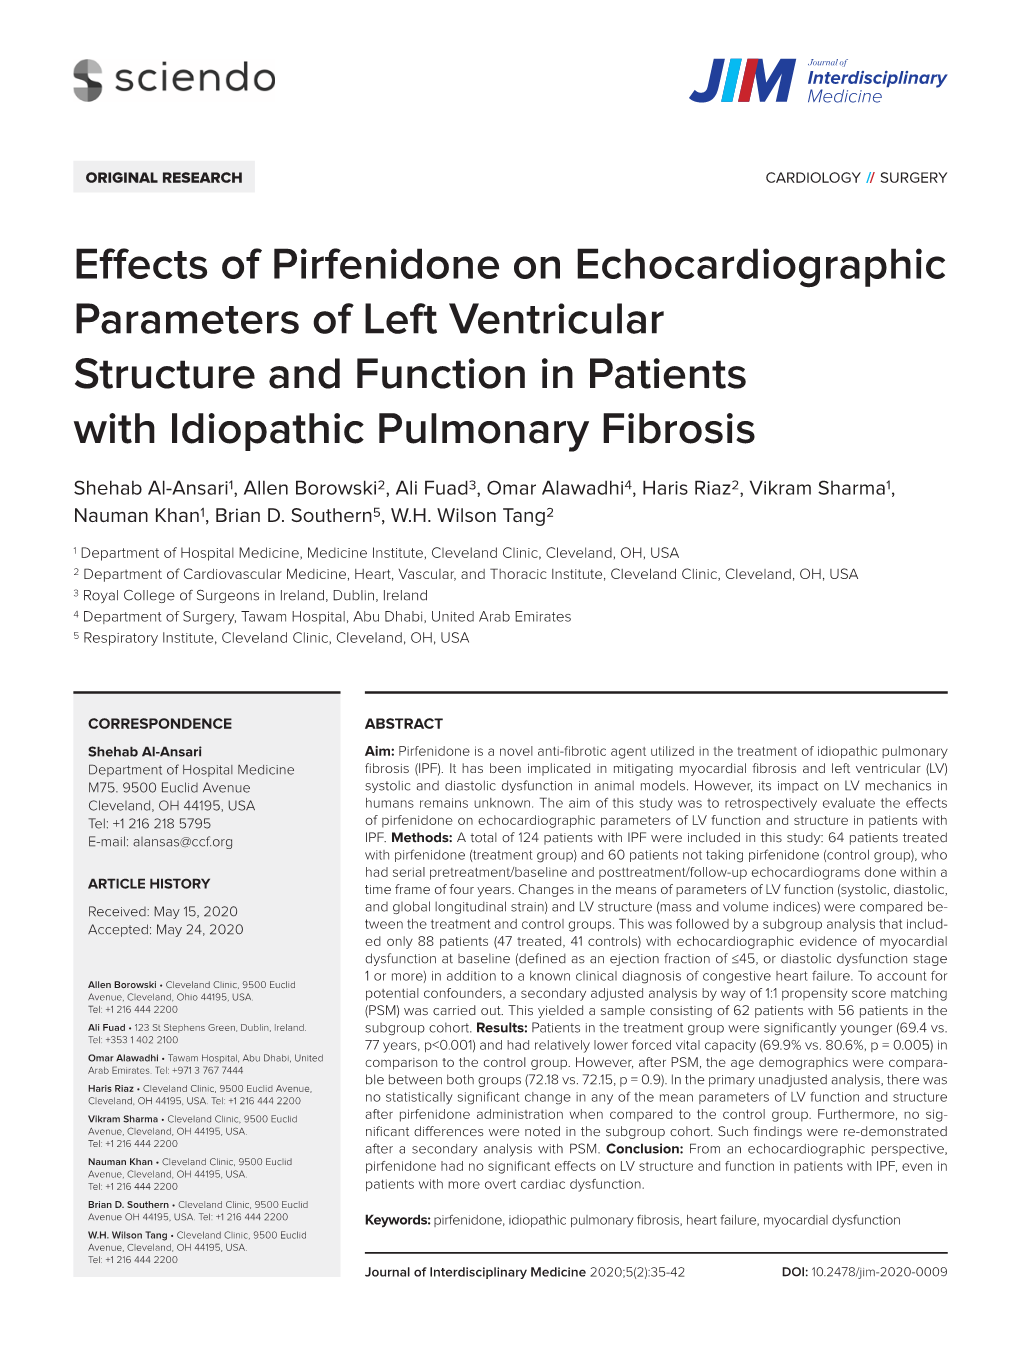 Effects of Pirfenidone on Echocardiographic Parameters of Left Ventricular Structure and Function in Patients with Idiopathic Pulmonary Fibrosis